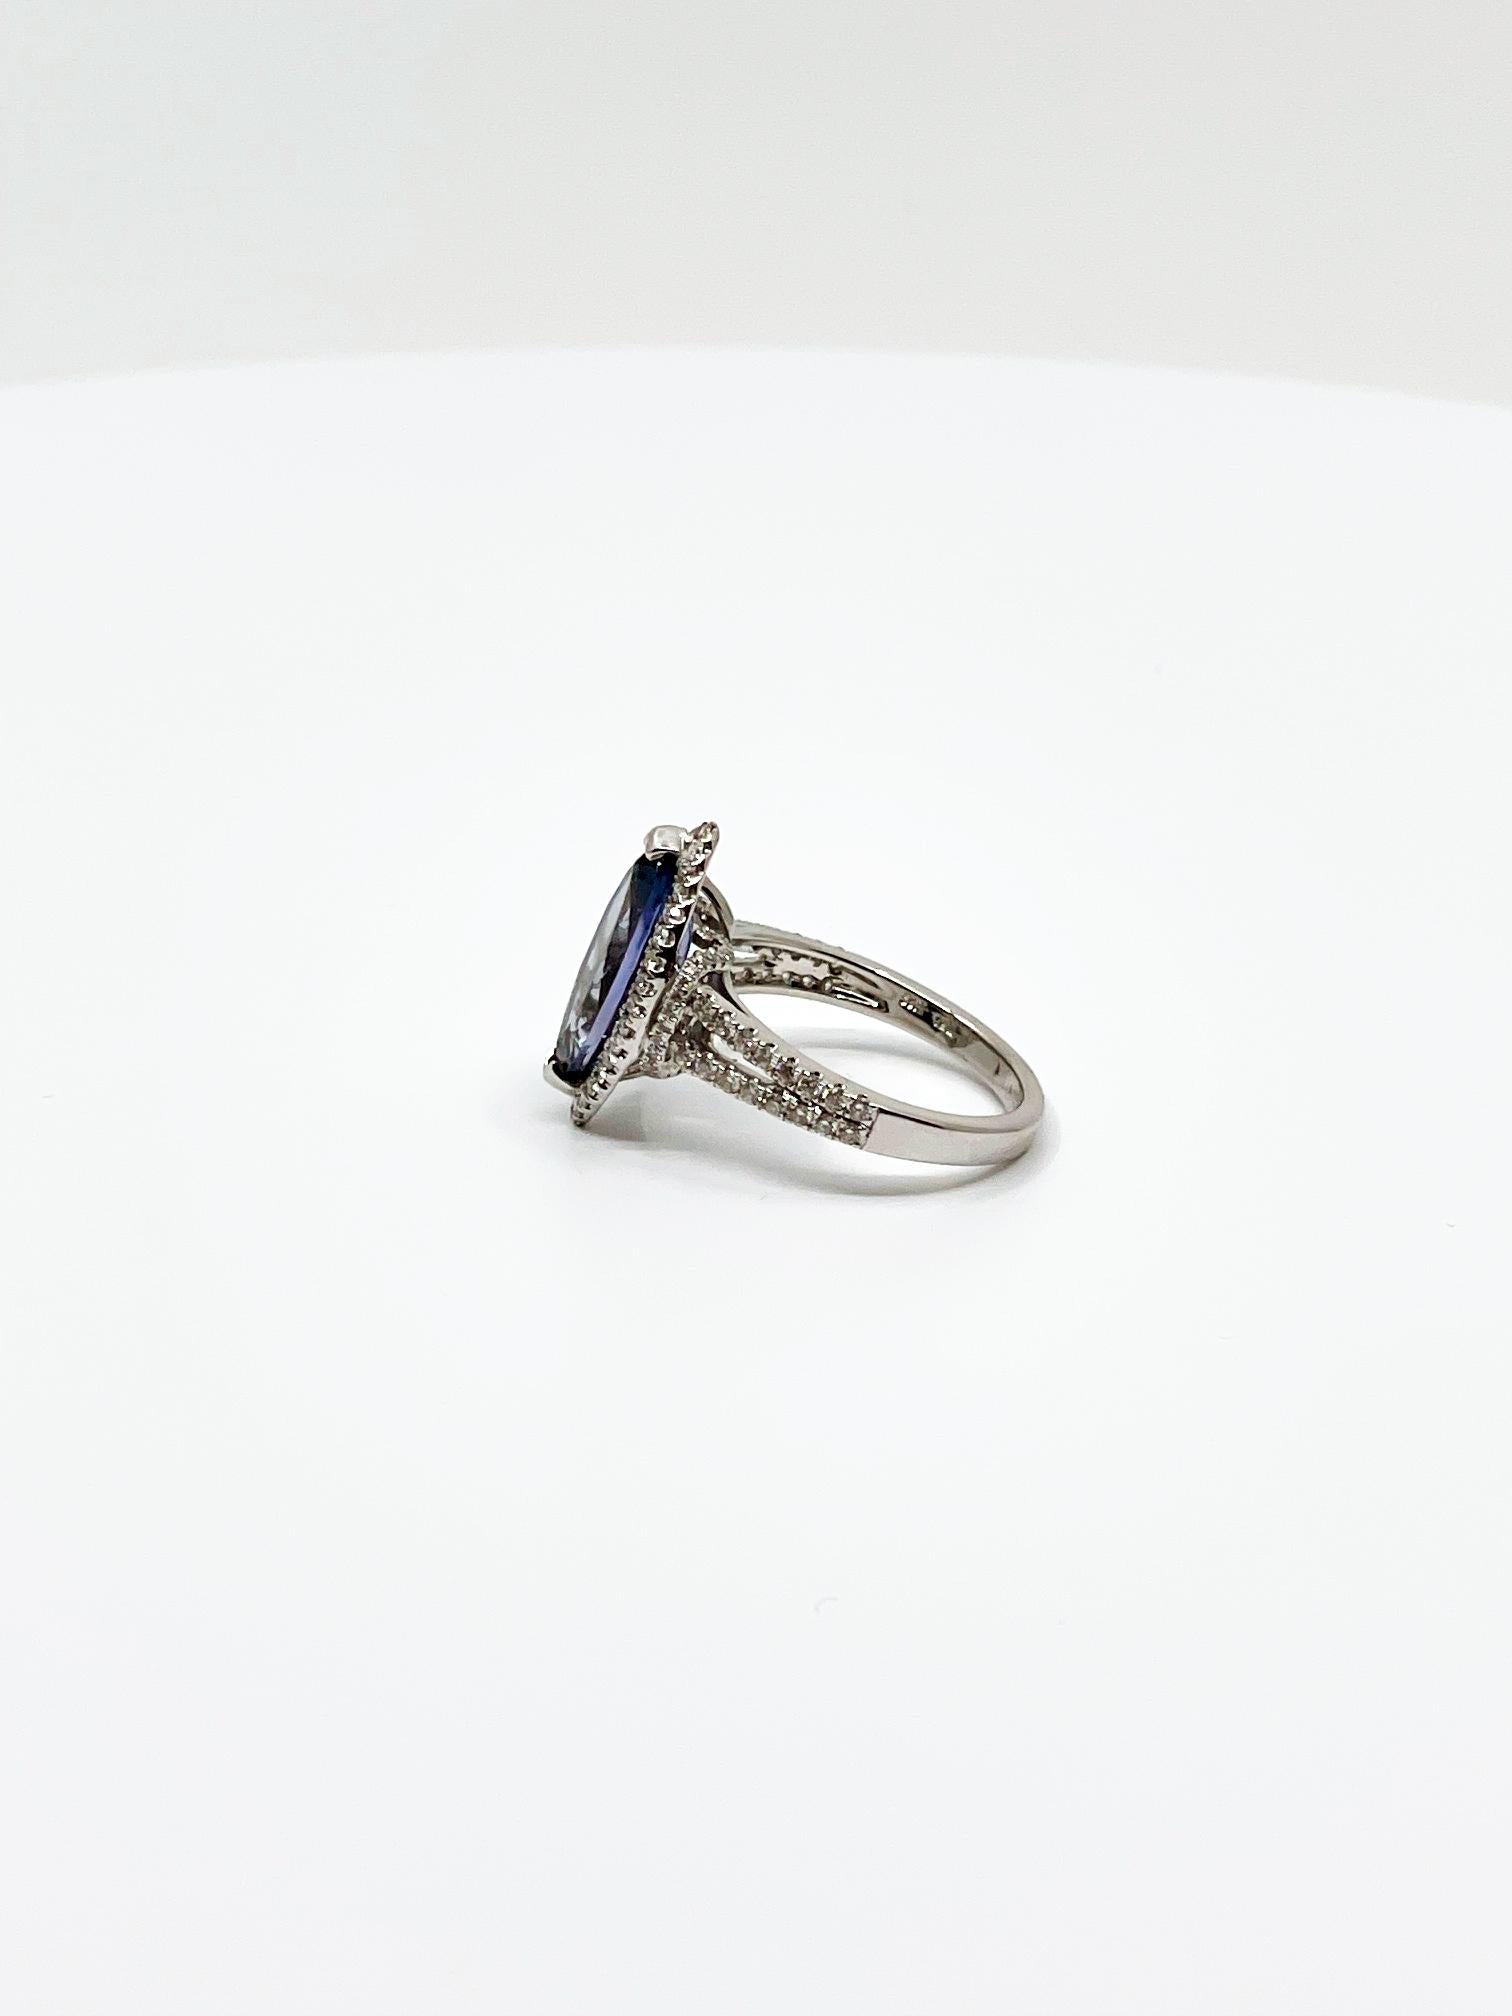 Marquise Cut Exceptional 3.55 Carat Natural Tanzanite & Diamond Cocktail Ring For Sale